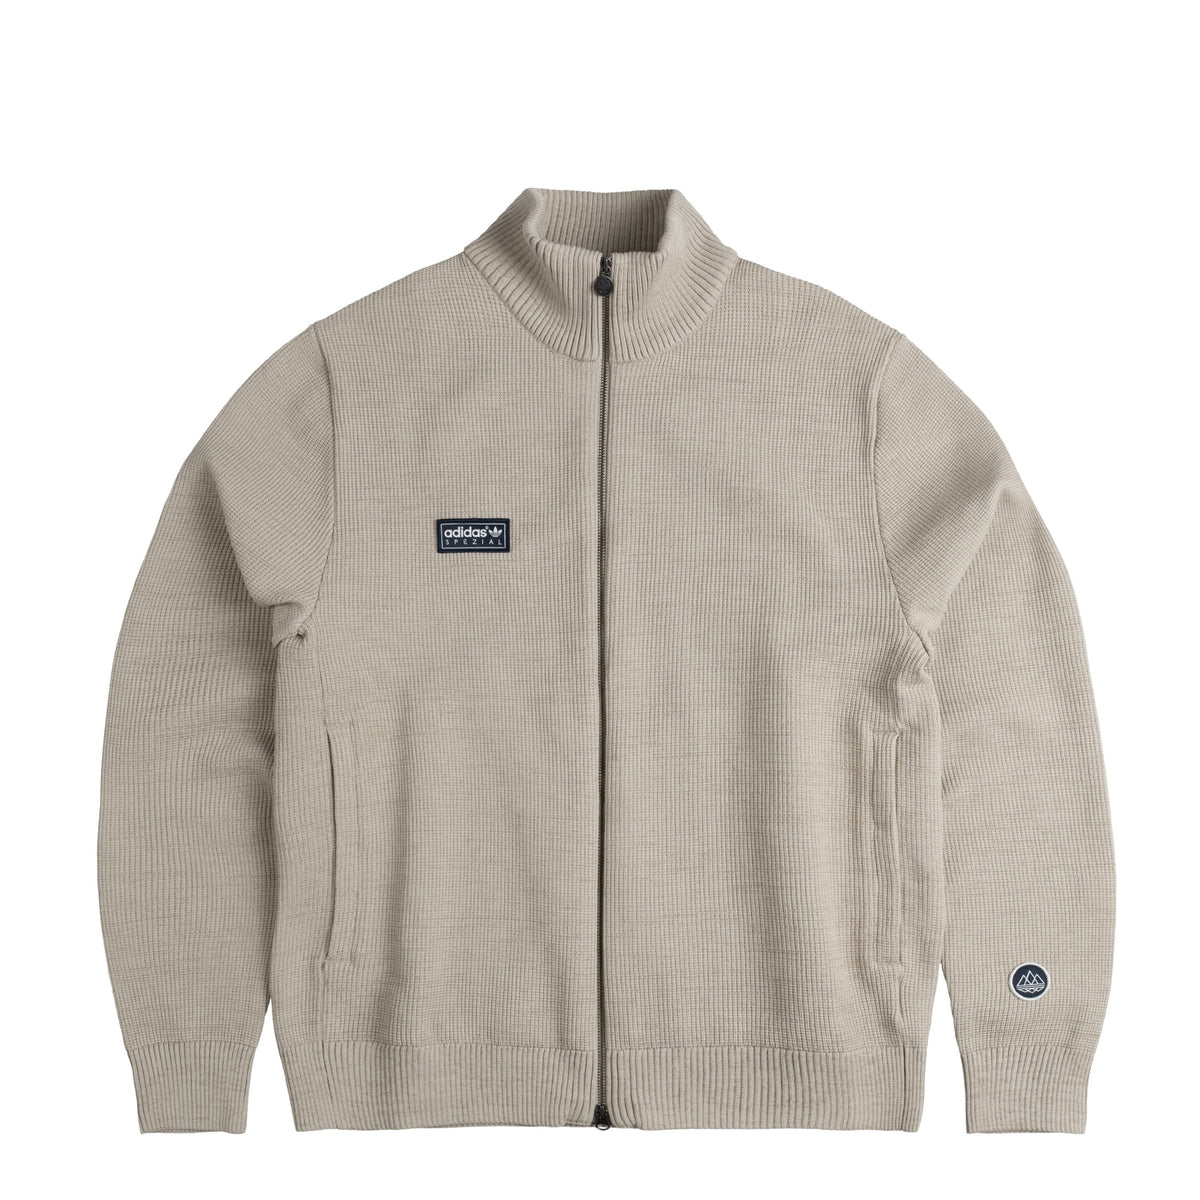 Adidas SPZL Lawton Track Top – buy now at Asphaltgold Online Store!